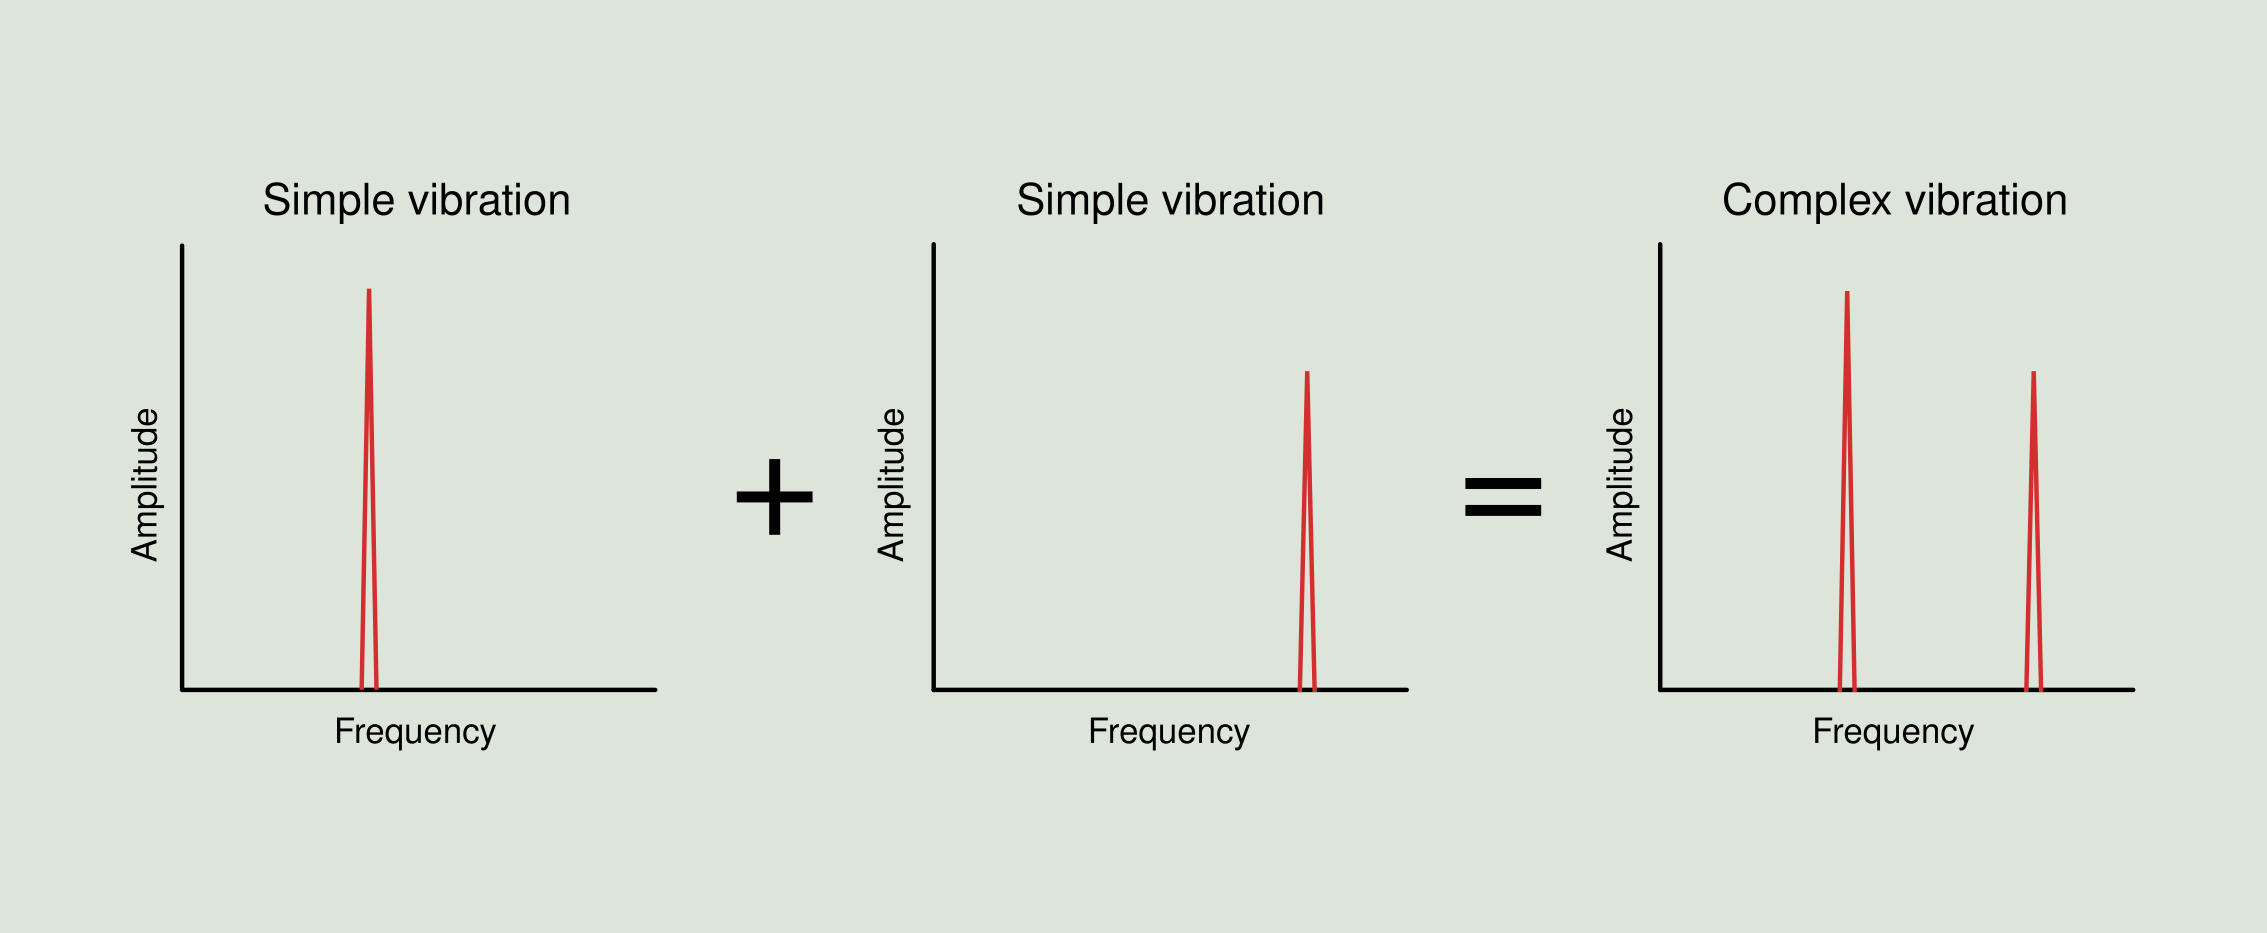 Figure 2.10: Frequency domain sum of simple vibration